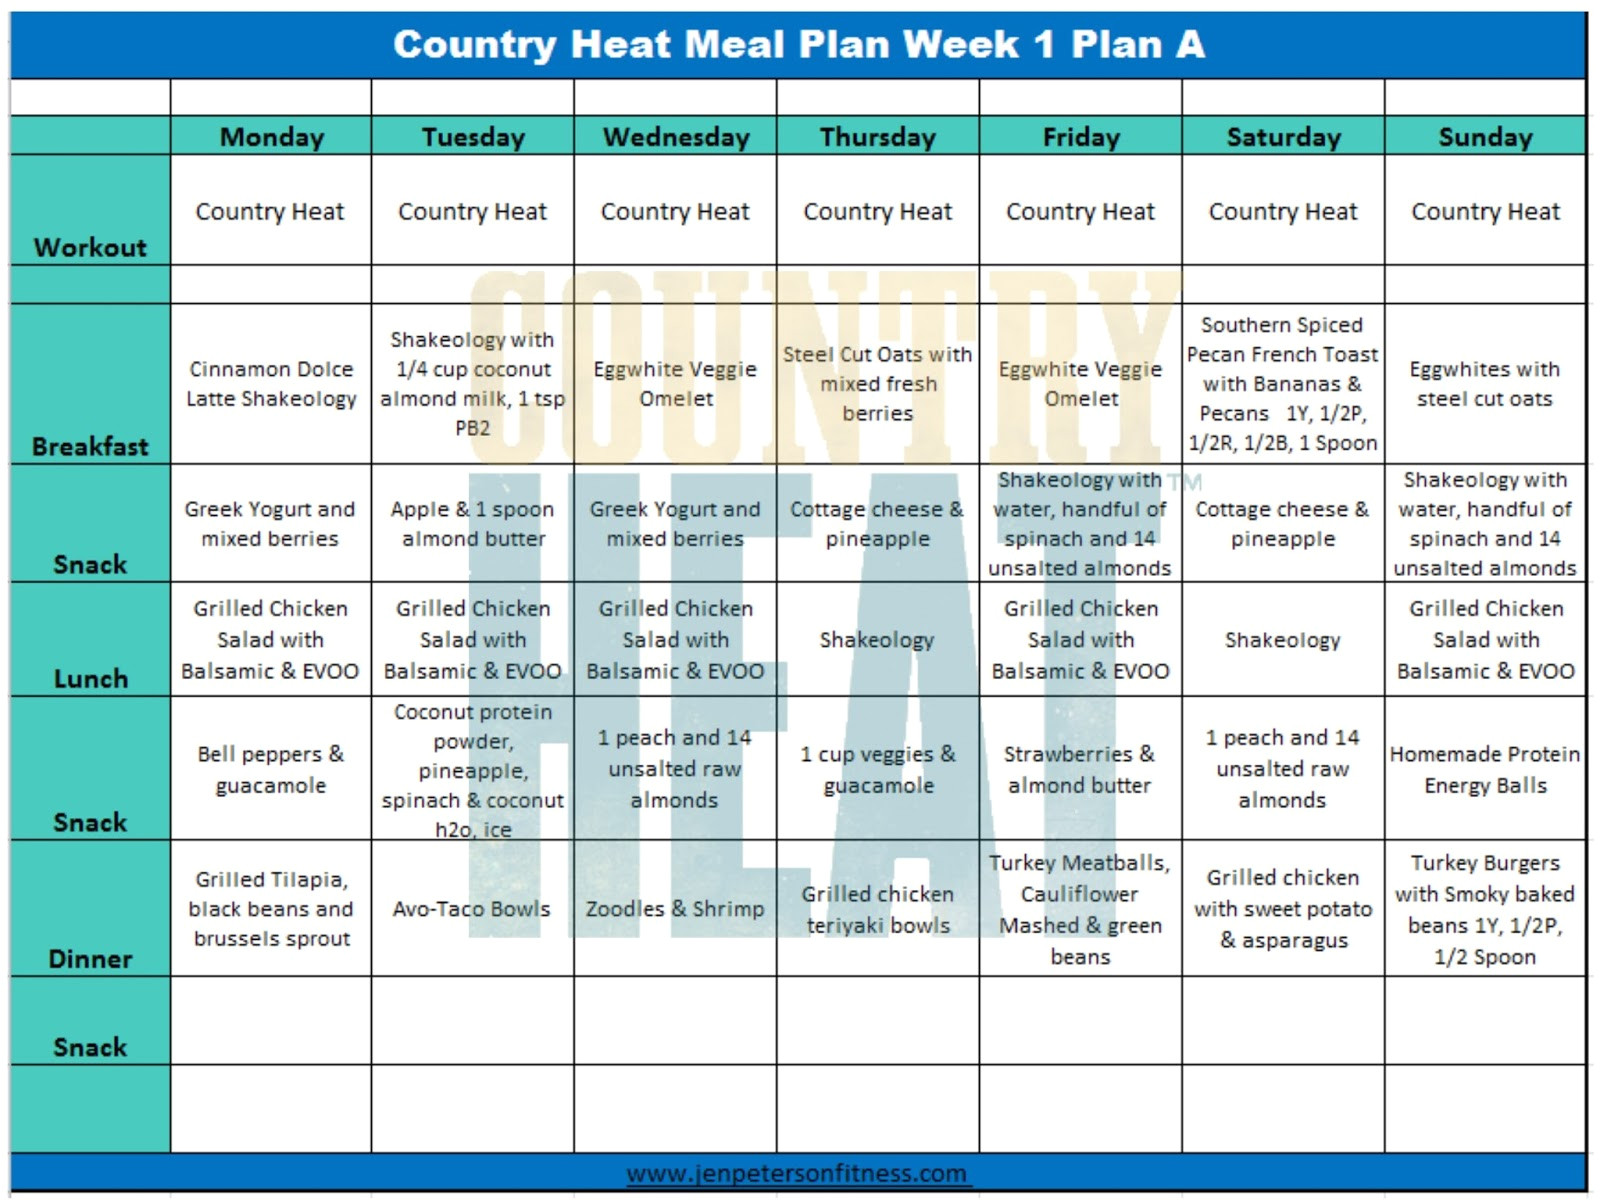 Eat at Home Meal Plan Reviews Clean Eating Mom Next Door Country Heat Week 1 Review and